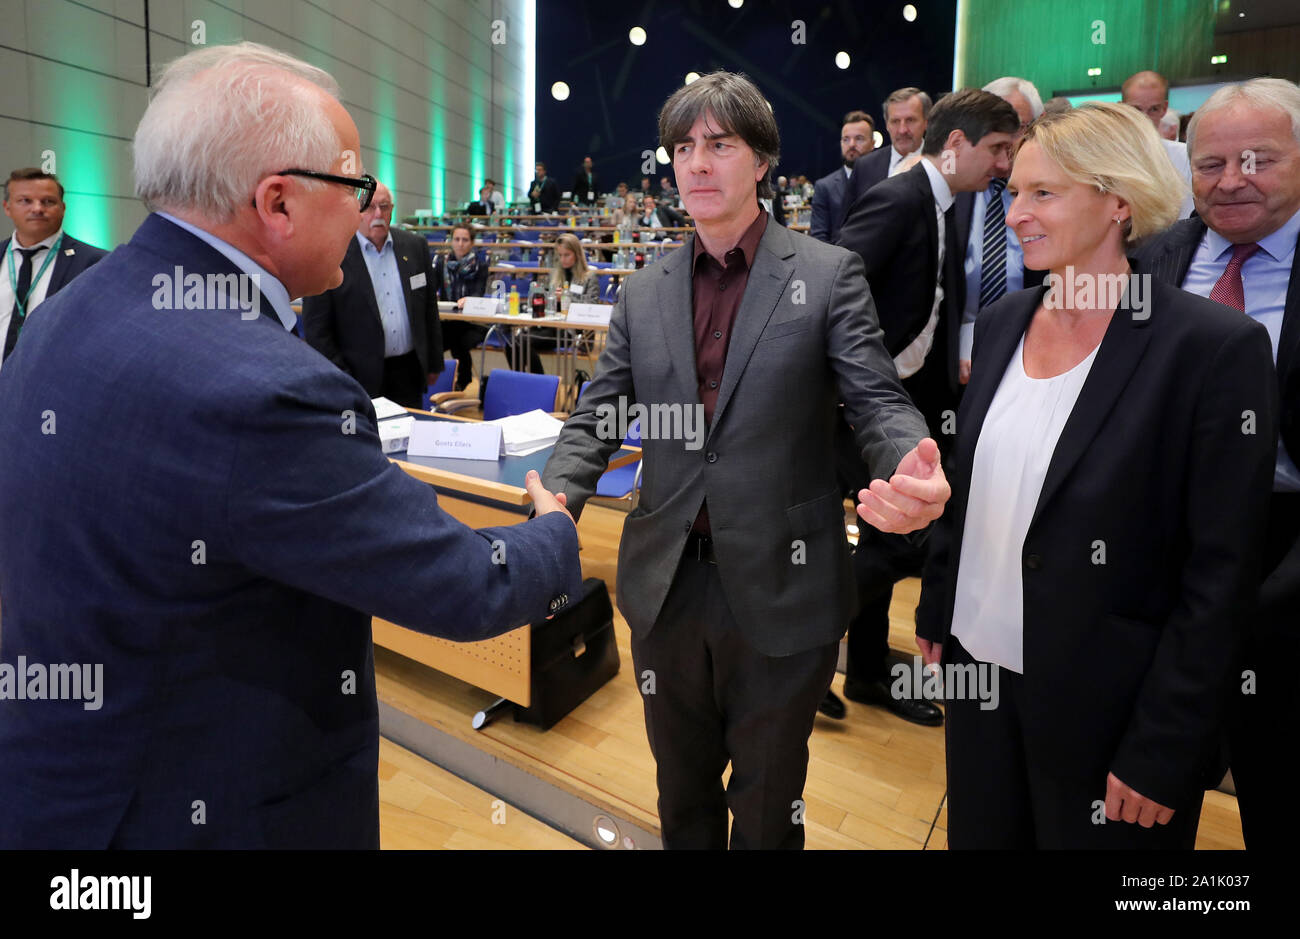 HANDOUT - 27 September 2019, Hessen, Frankfurt/Main: Joachim Löw (M), national coach of the German men's national football team, and Martina Voss-Tecklenburg (r), national coach of the German women's national football team, congratulate the newly elected DFB President Fritz Keller (l) at the 43rd ordinary DFB Bundestag in the Congress Centre. The Bundestag of the German Football Association (DFB) is under the motto 'Bund für die Zukunft - Im Team den Fußball gestalten'. Photo: Simon Hofmann/Getty Images Europe/DFB/dpa - ATTENTION: Only for editorial use and only with complete mention of the ab Stock Photo